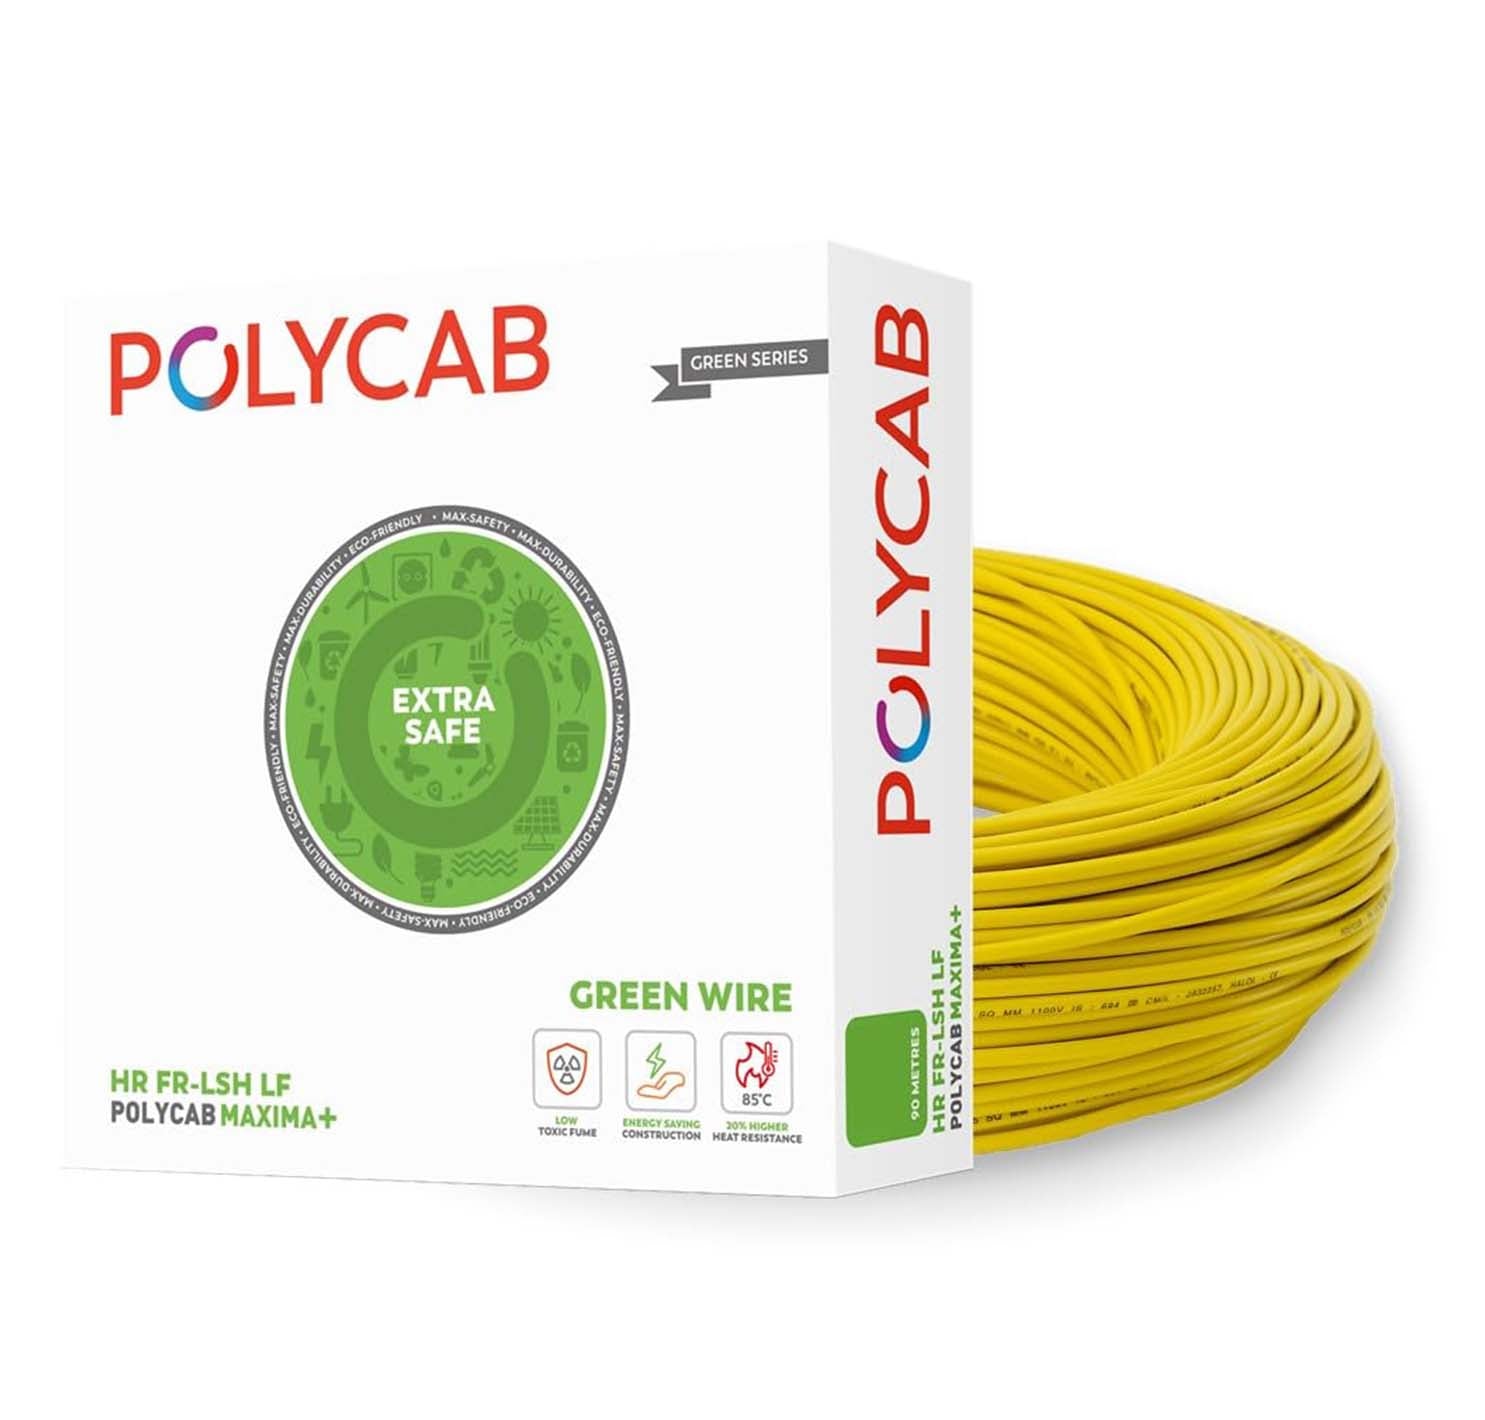 Polycab Maxima+ Domestic Electrical Wire - 90 Meter - Yellow Wire